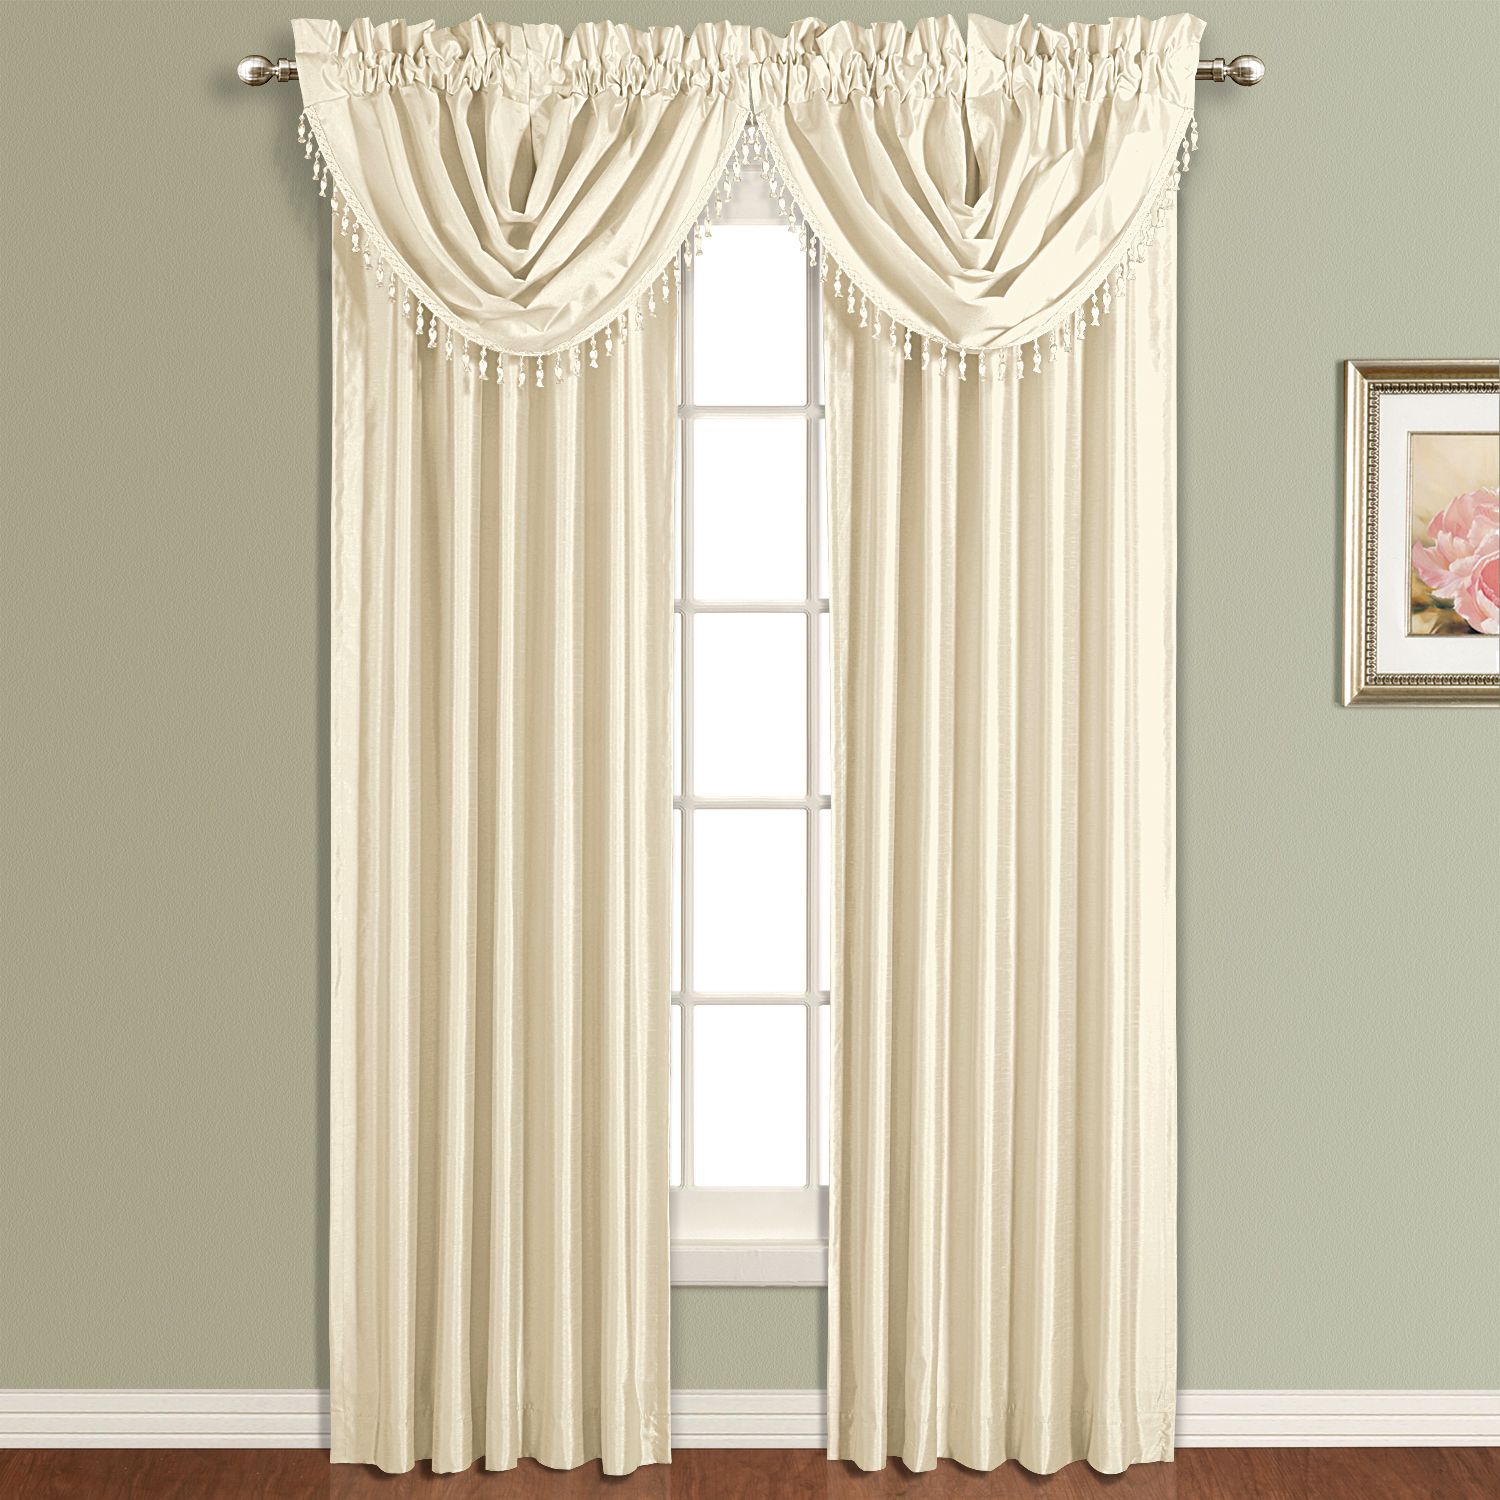 United Curtain Company Anna 50 X 32 waterfall  valance:white, natural, sage, taupe, blue, gold, burgundy & chocolate